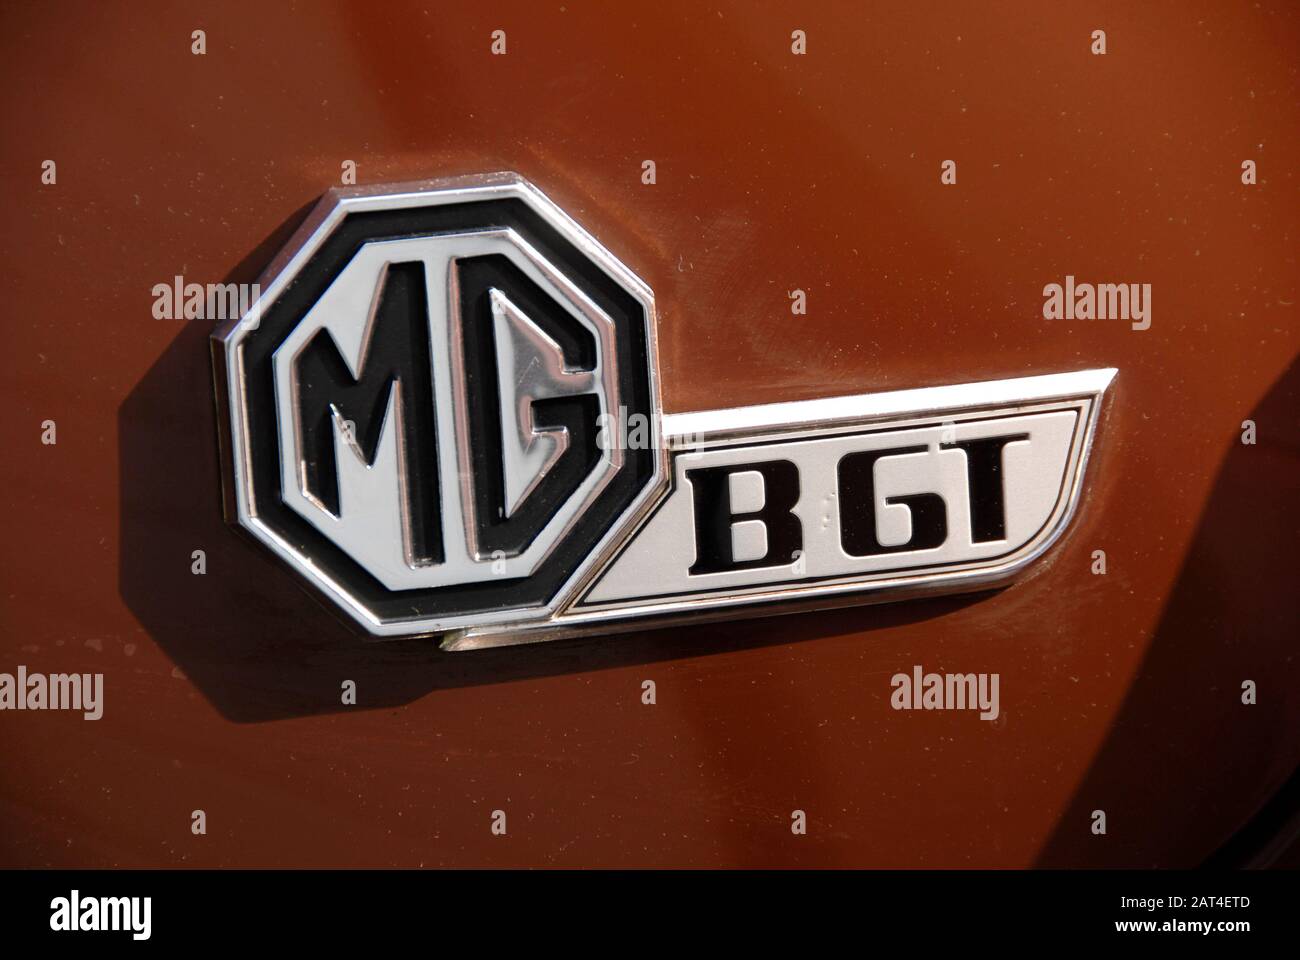 Sign on rear of MGB GT sports car in russet brown color Stock Photo